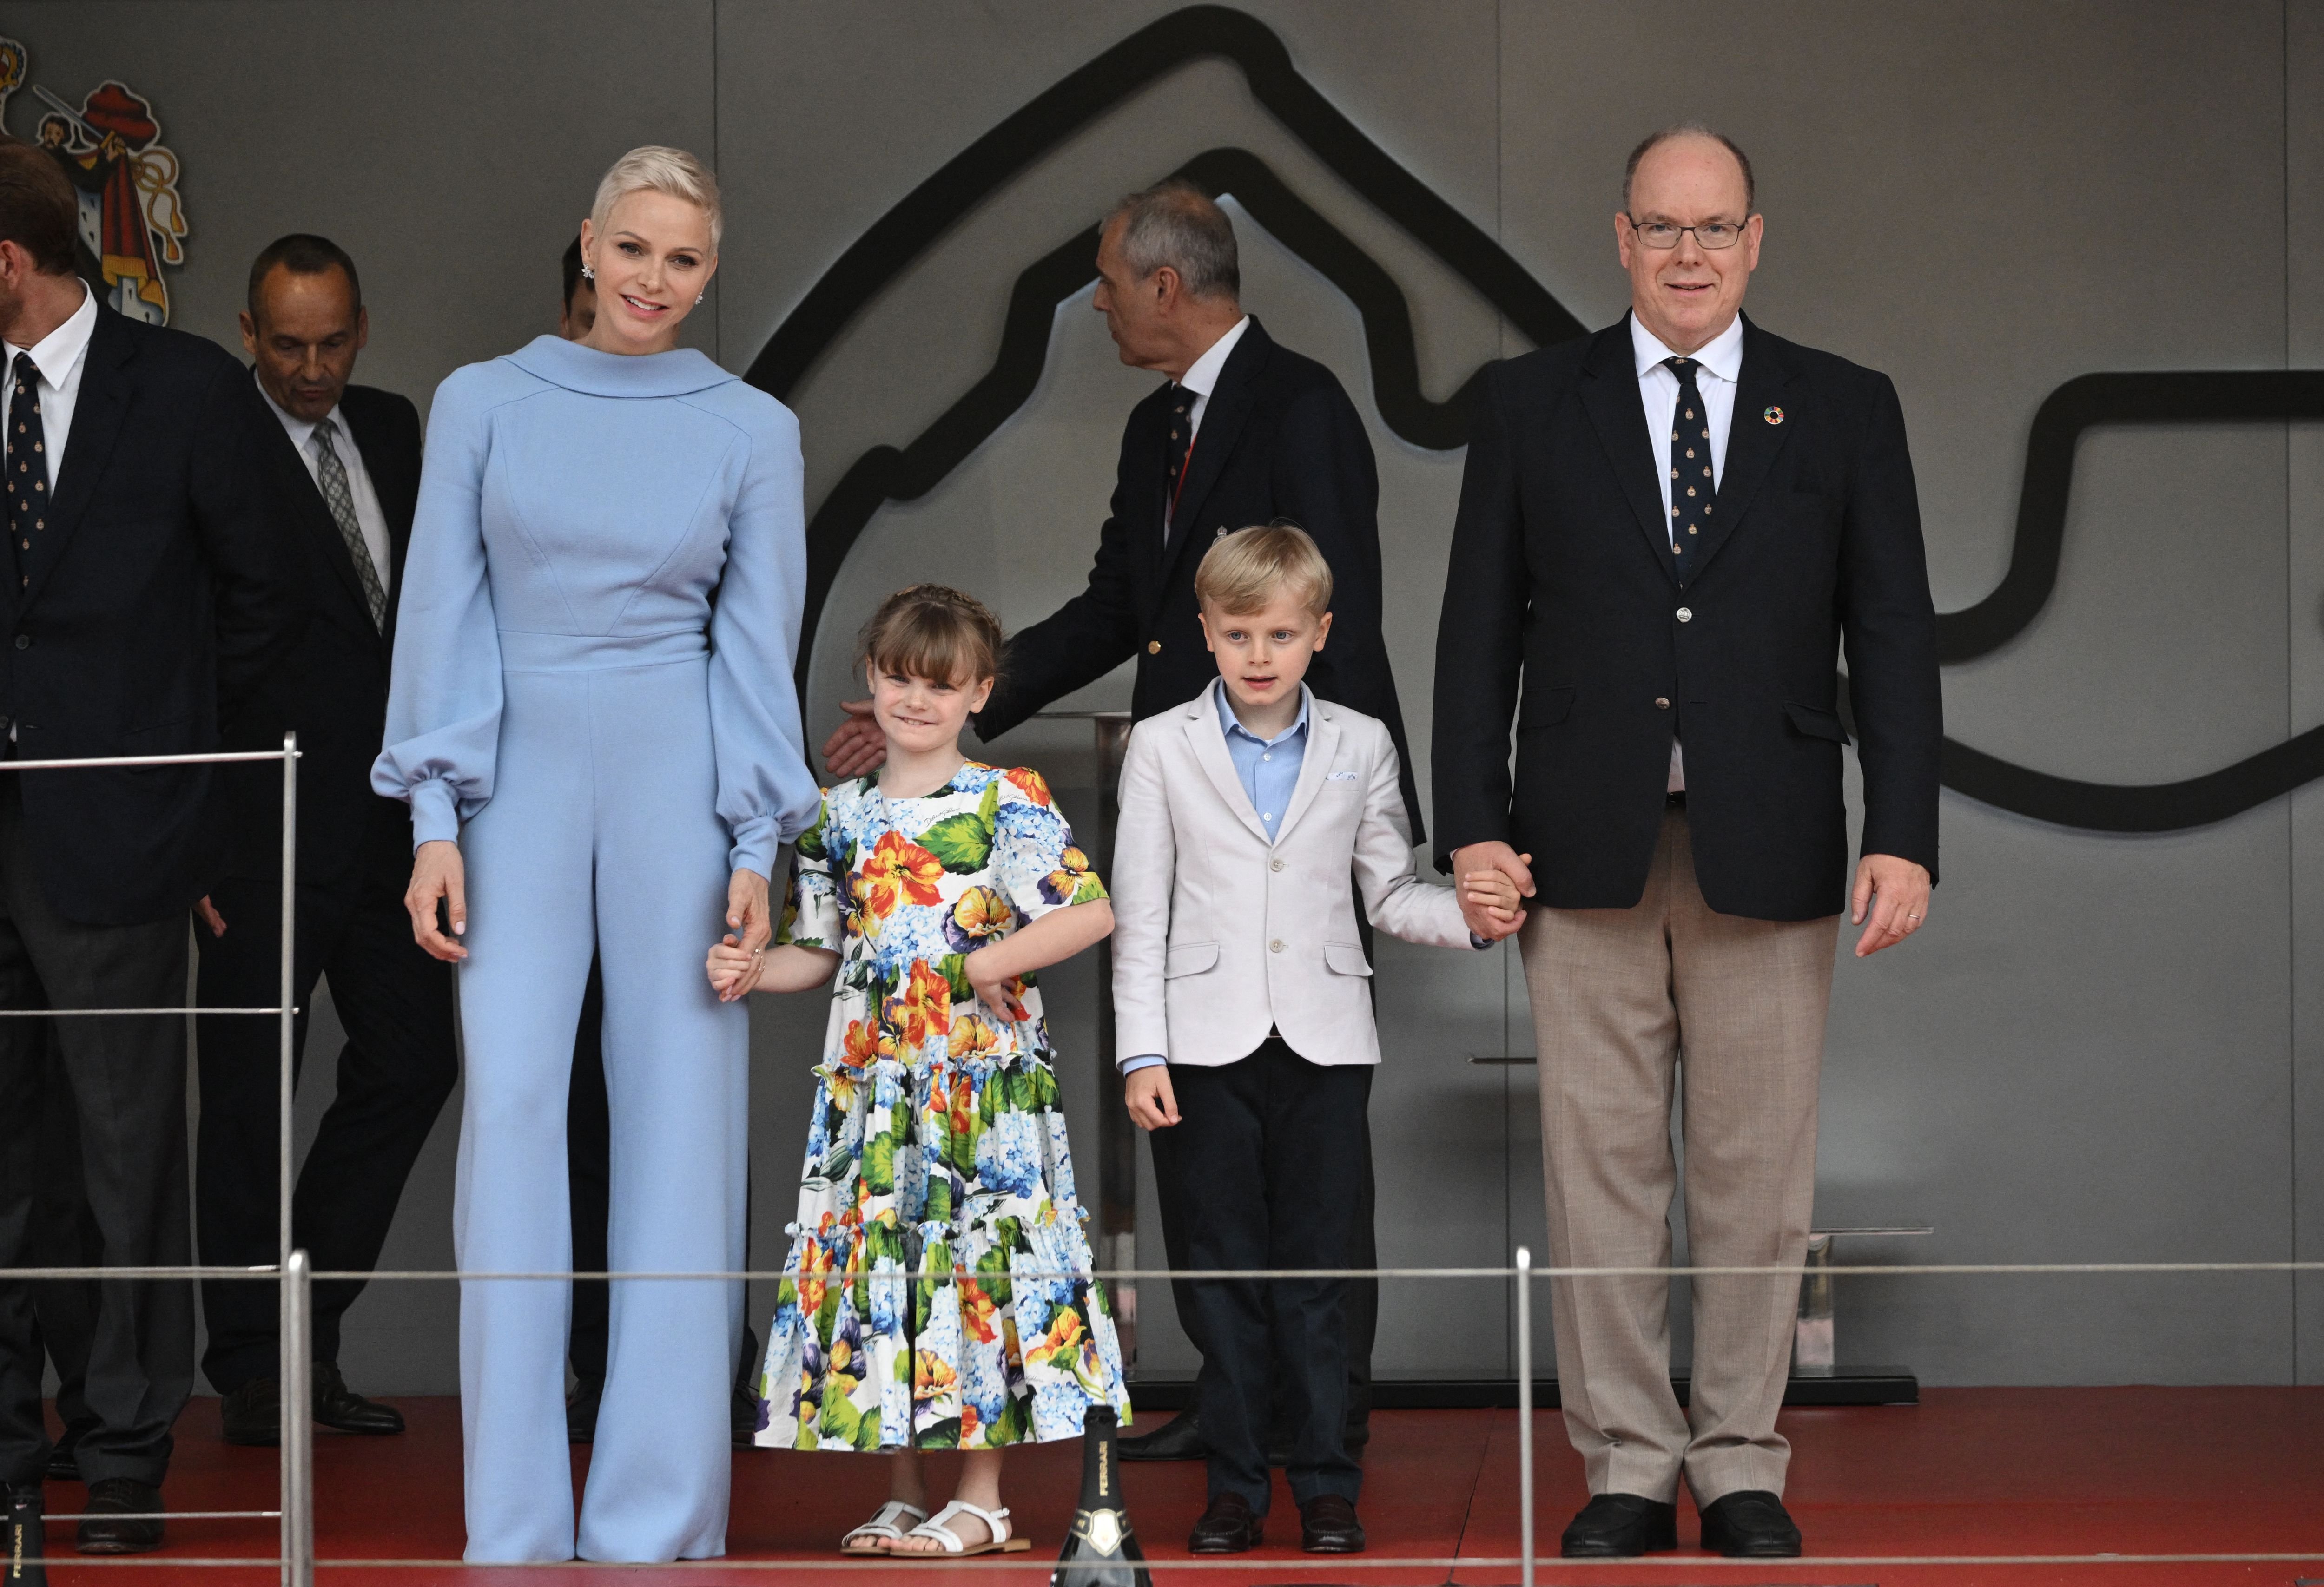 Prince Albert II and Princess Charlene of Monaco with their children Jacques and Gabriella after the Monaco Formula 1 Grand Prix at the Monaco street circuit in Monaco, on May 29, 2022. | Source: Getty Images